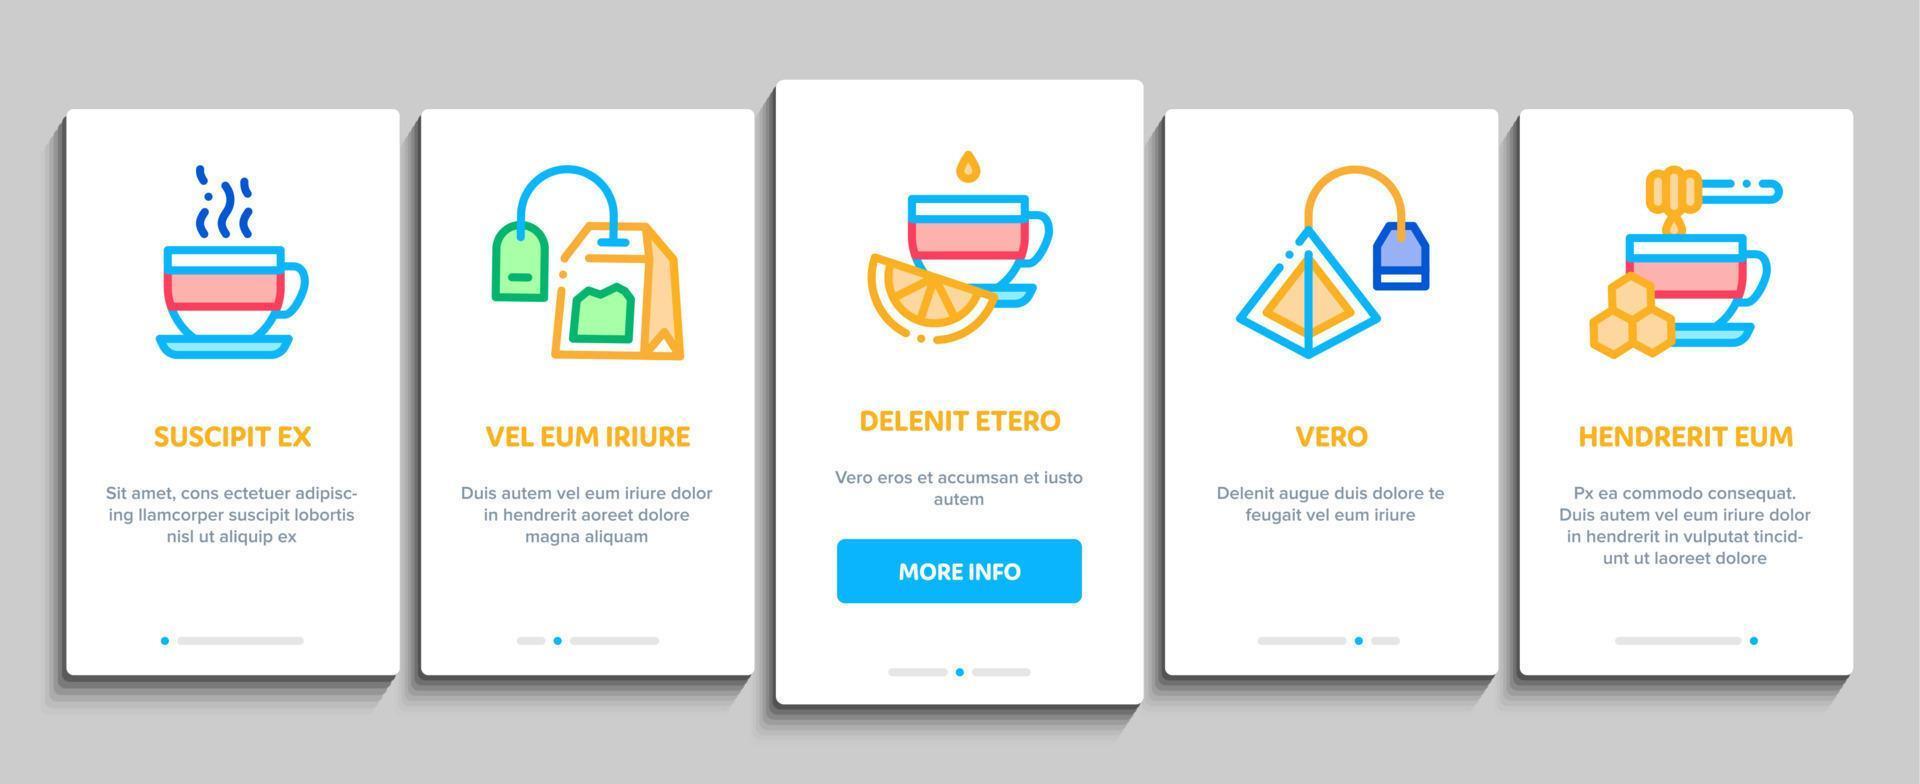 Tea Ceremony Tradition Onboarding Elements Icons Set Vector